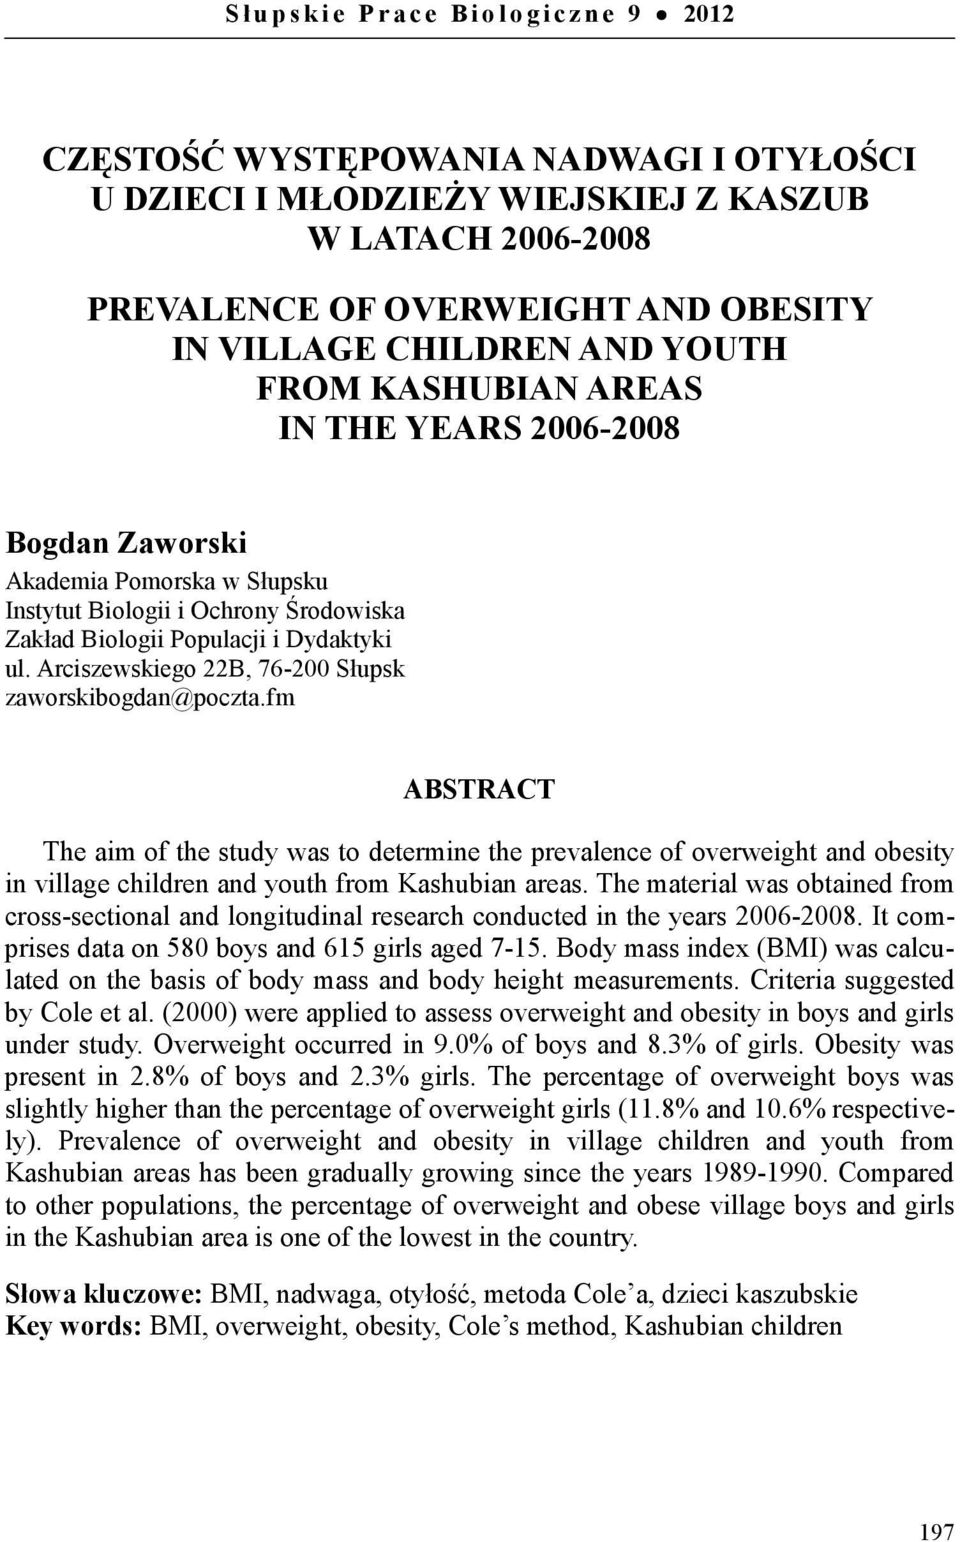 Arciszewskiego 22B, 76-200 Słupsk zaworskibogdan@poczta.fm ABSTRACT The aim of the study was to determine the prevalence of overweight and obesity in village children and youth from Kashubian areas.